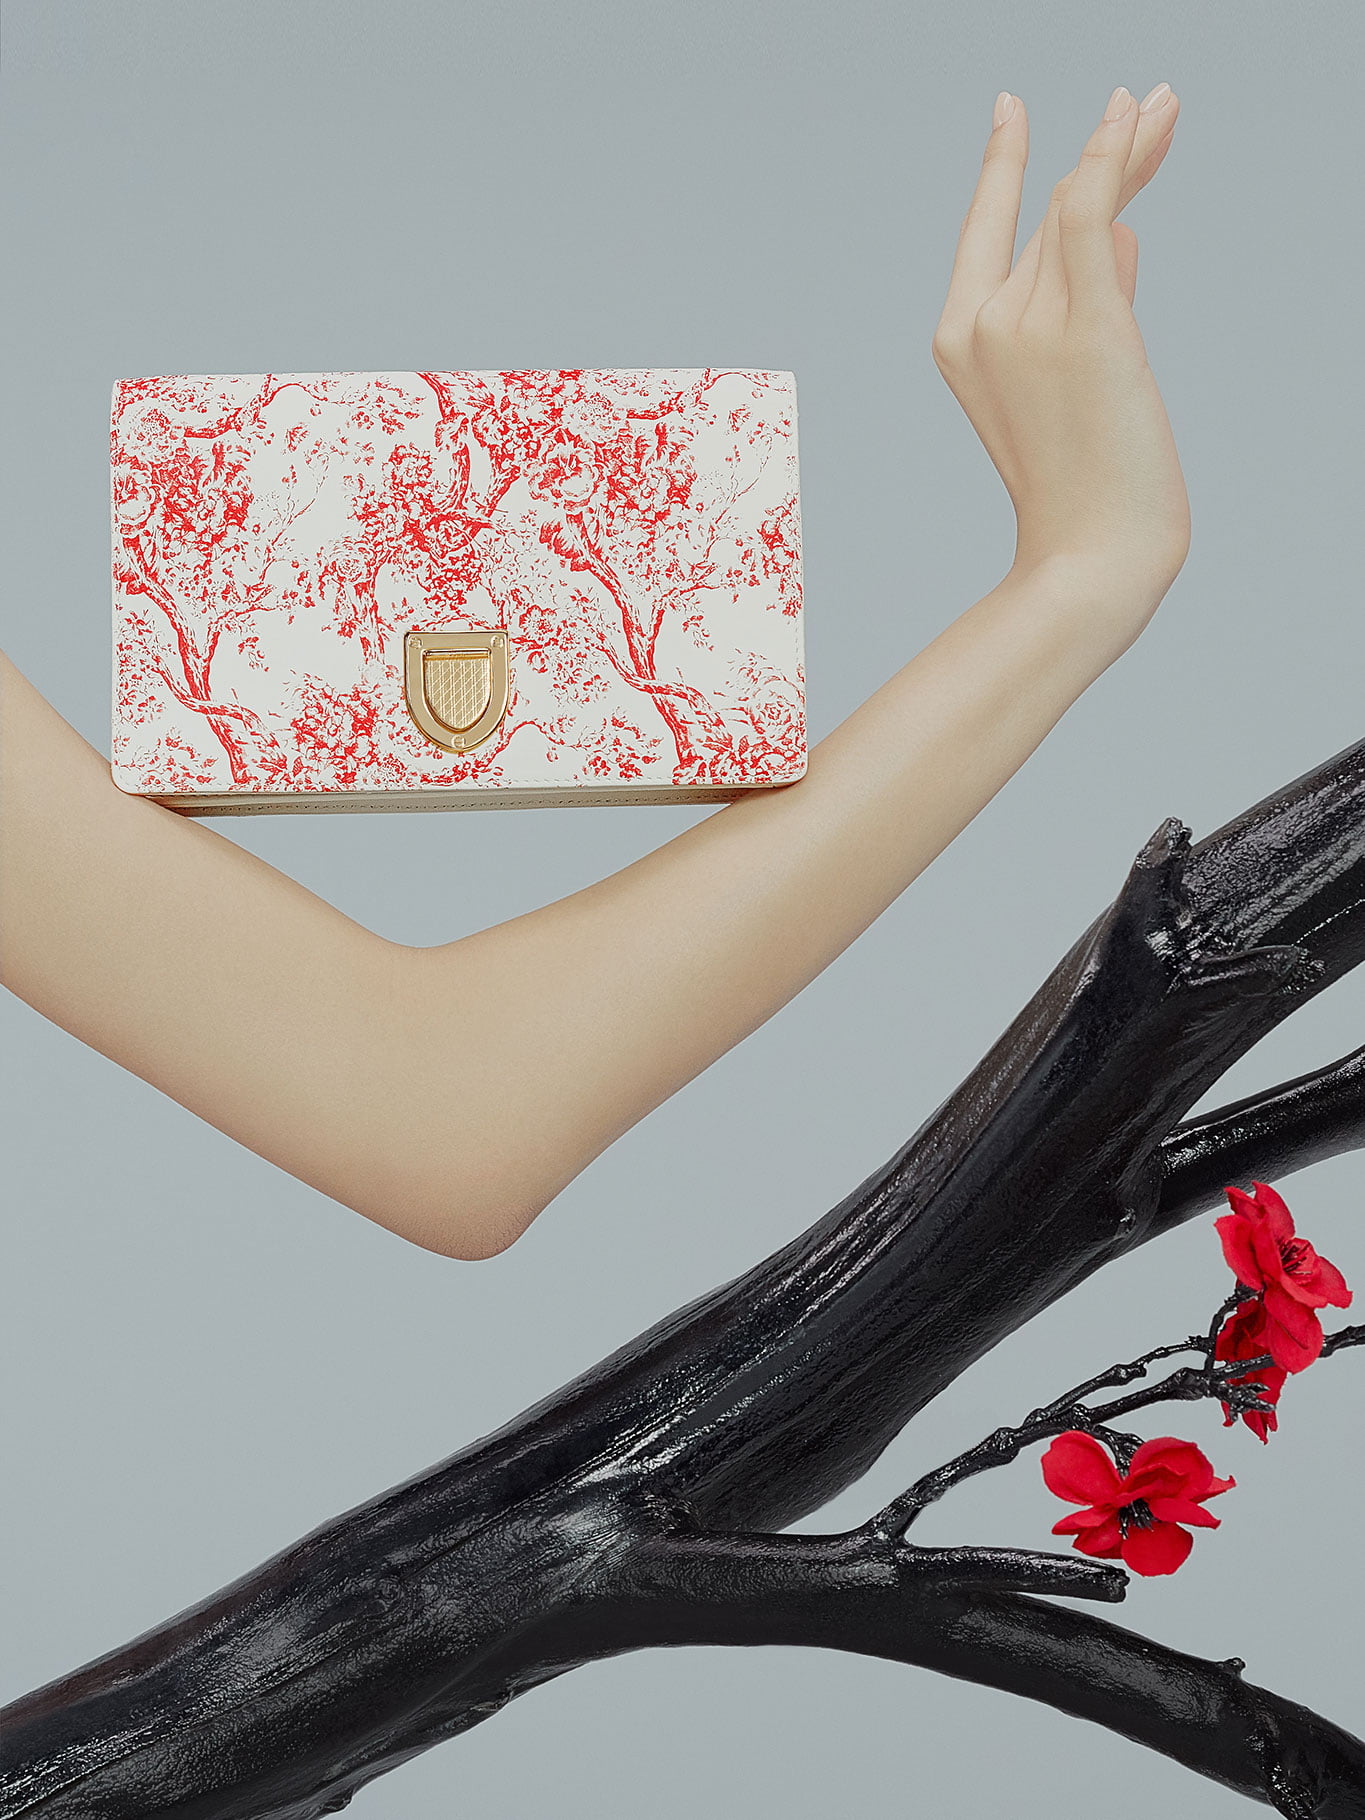 GIFT GUIDE: 2022 Lunar New Year Capsule Collection from Dior